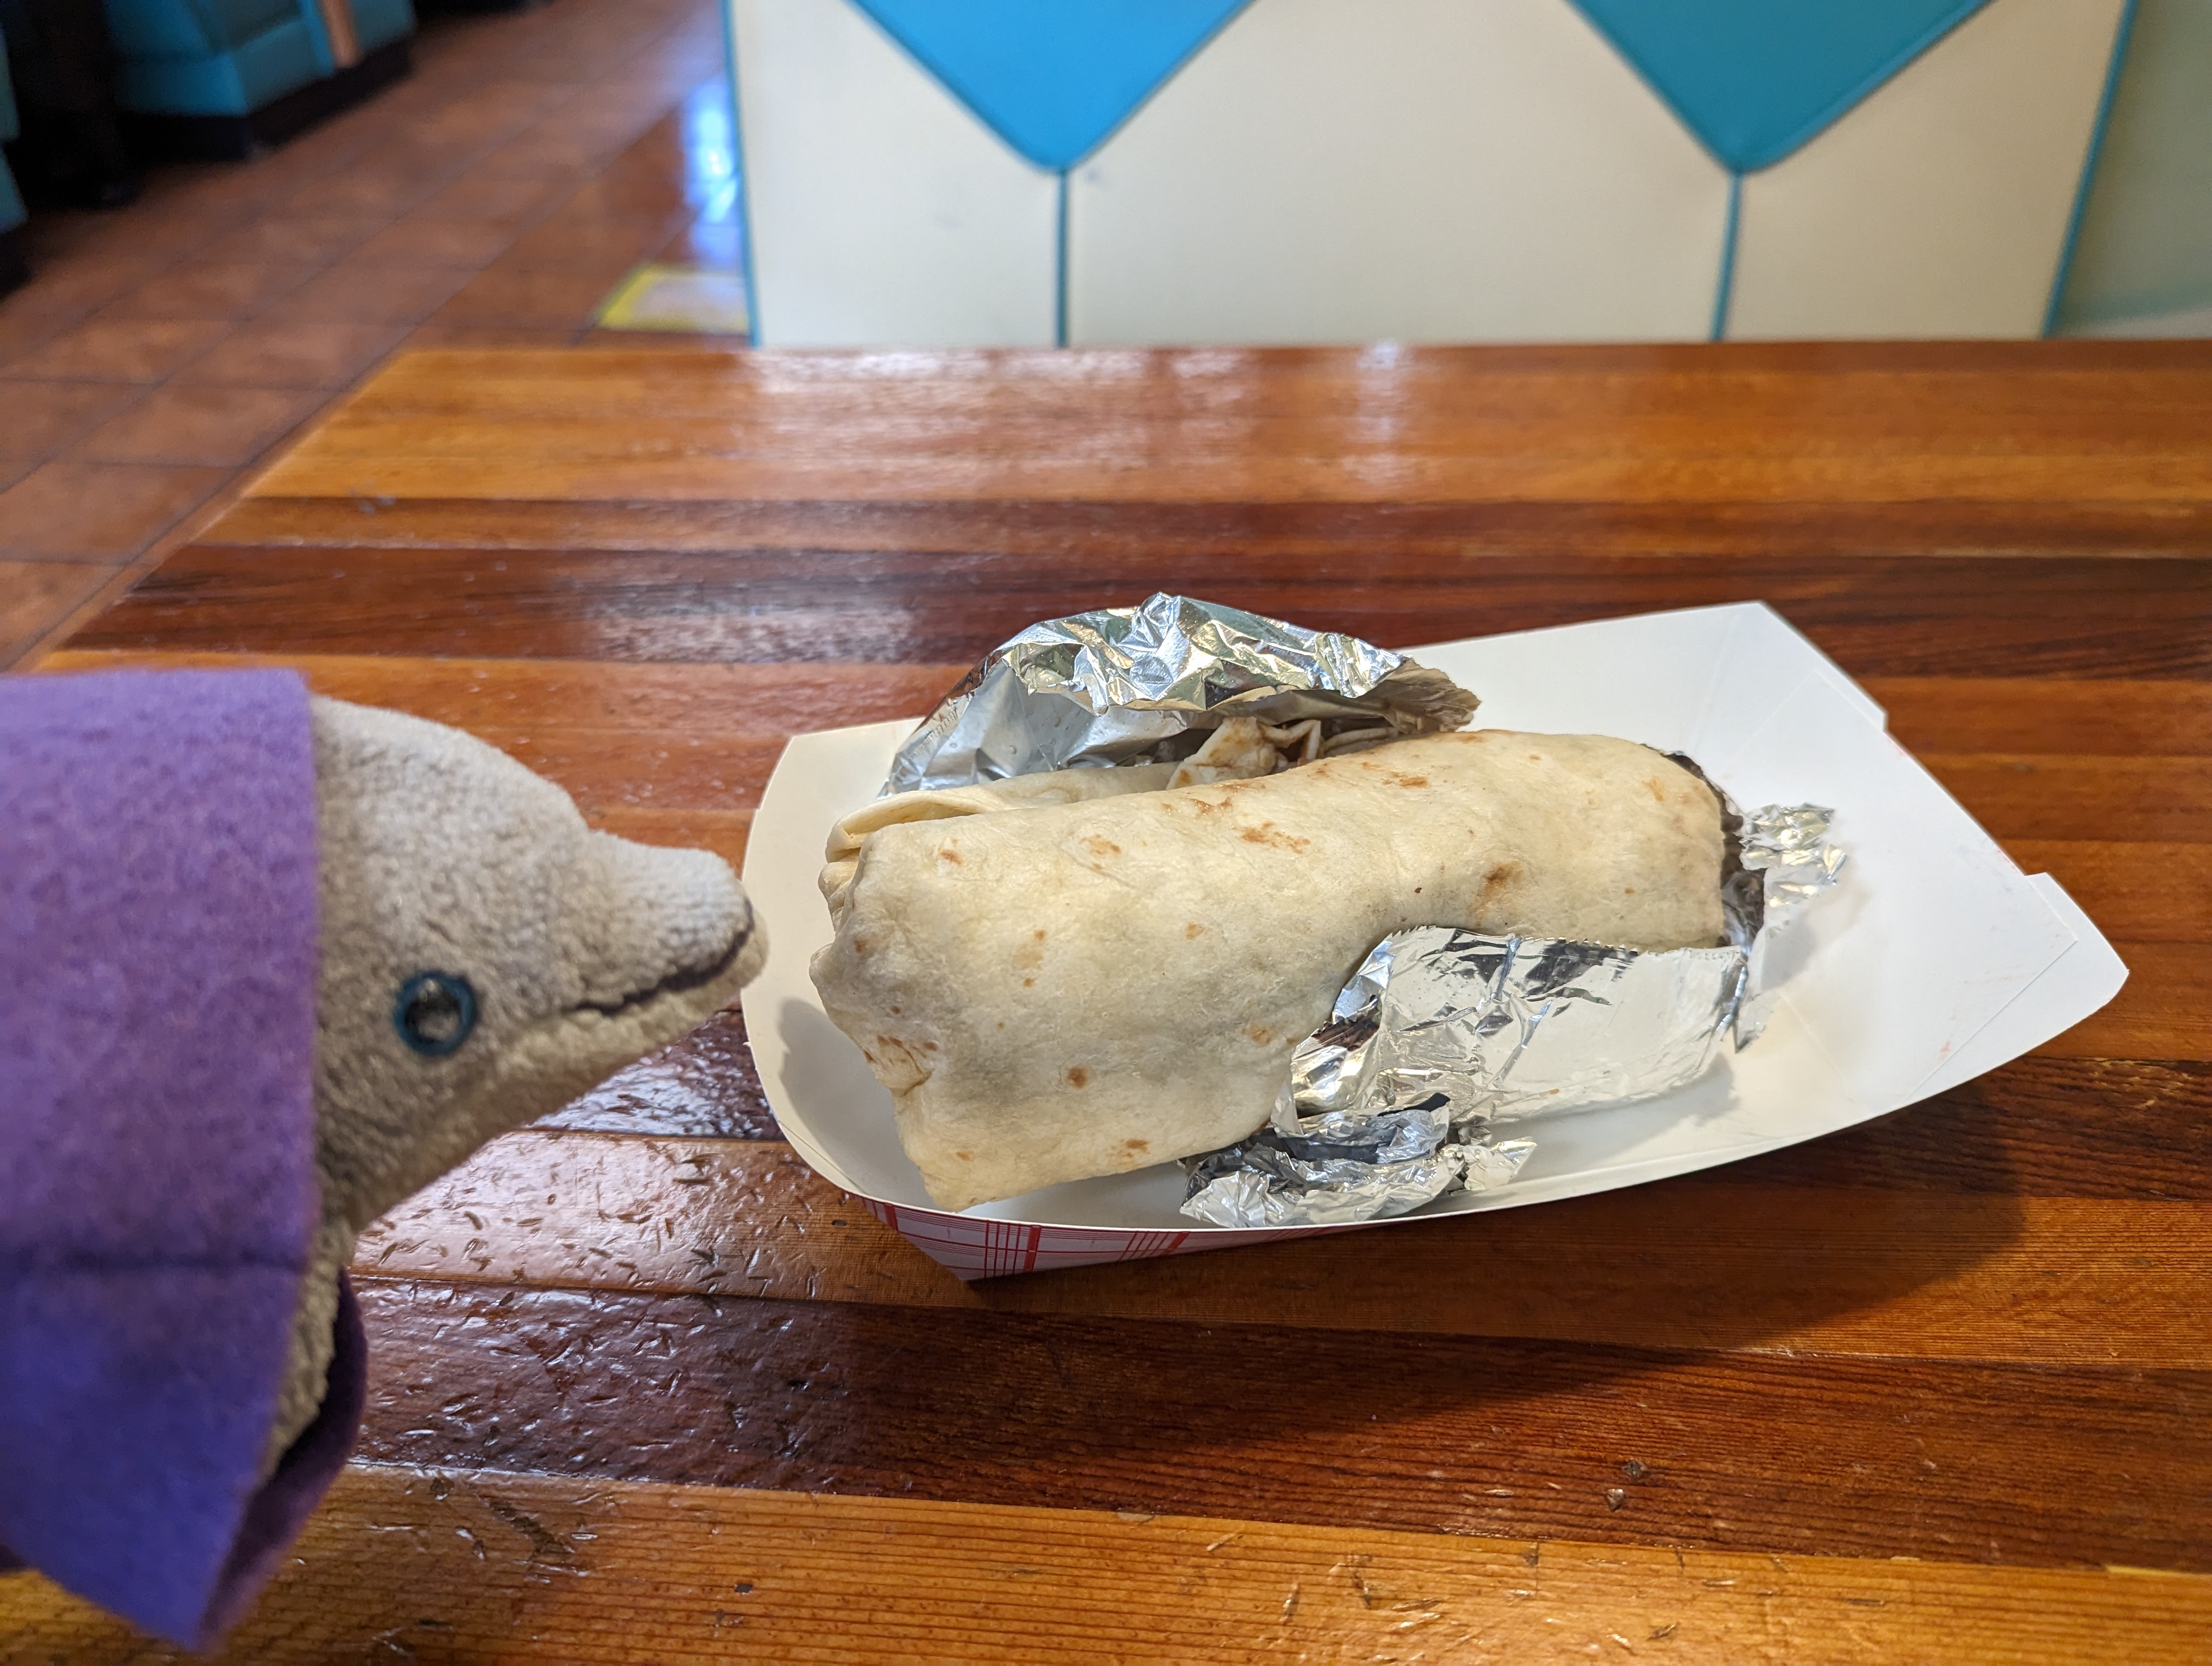 Willie and a burrito